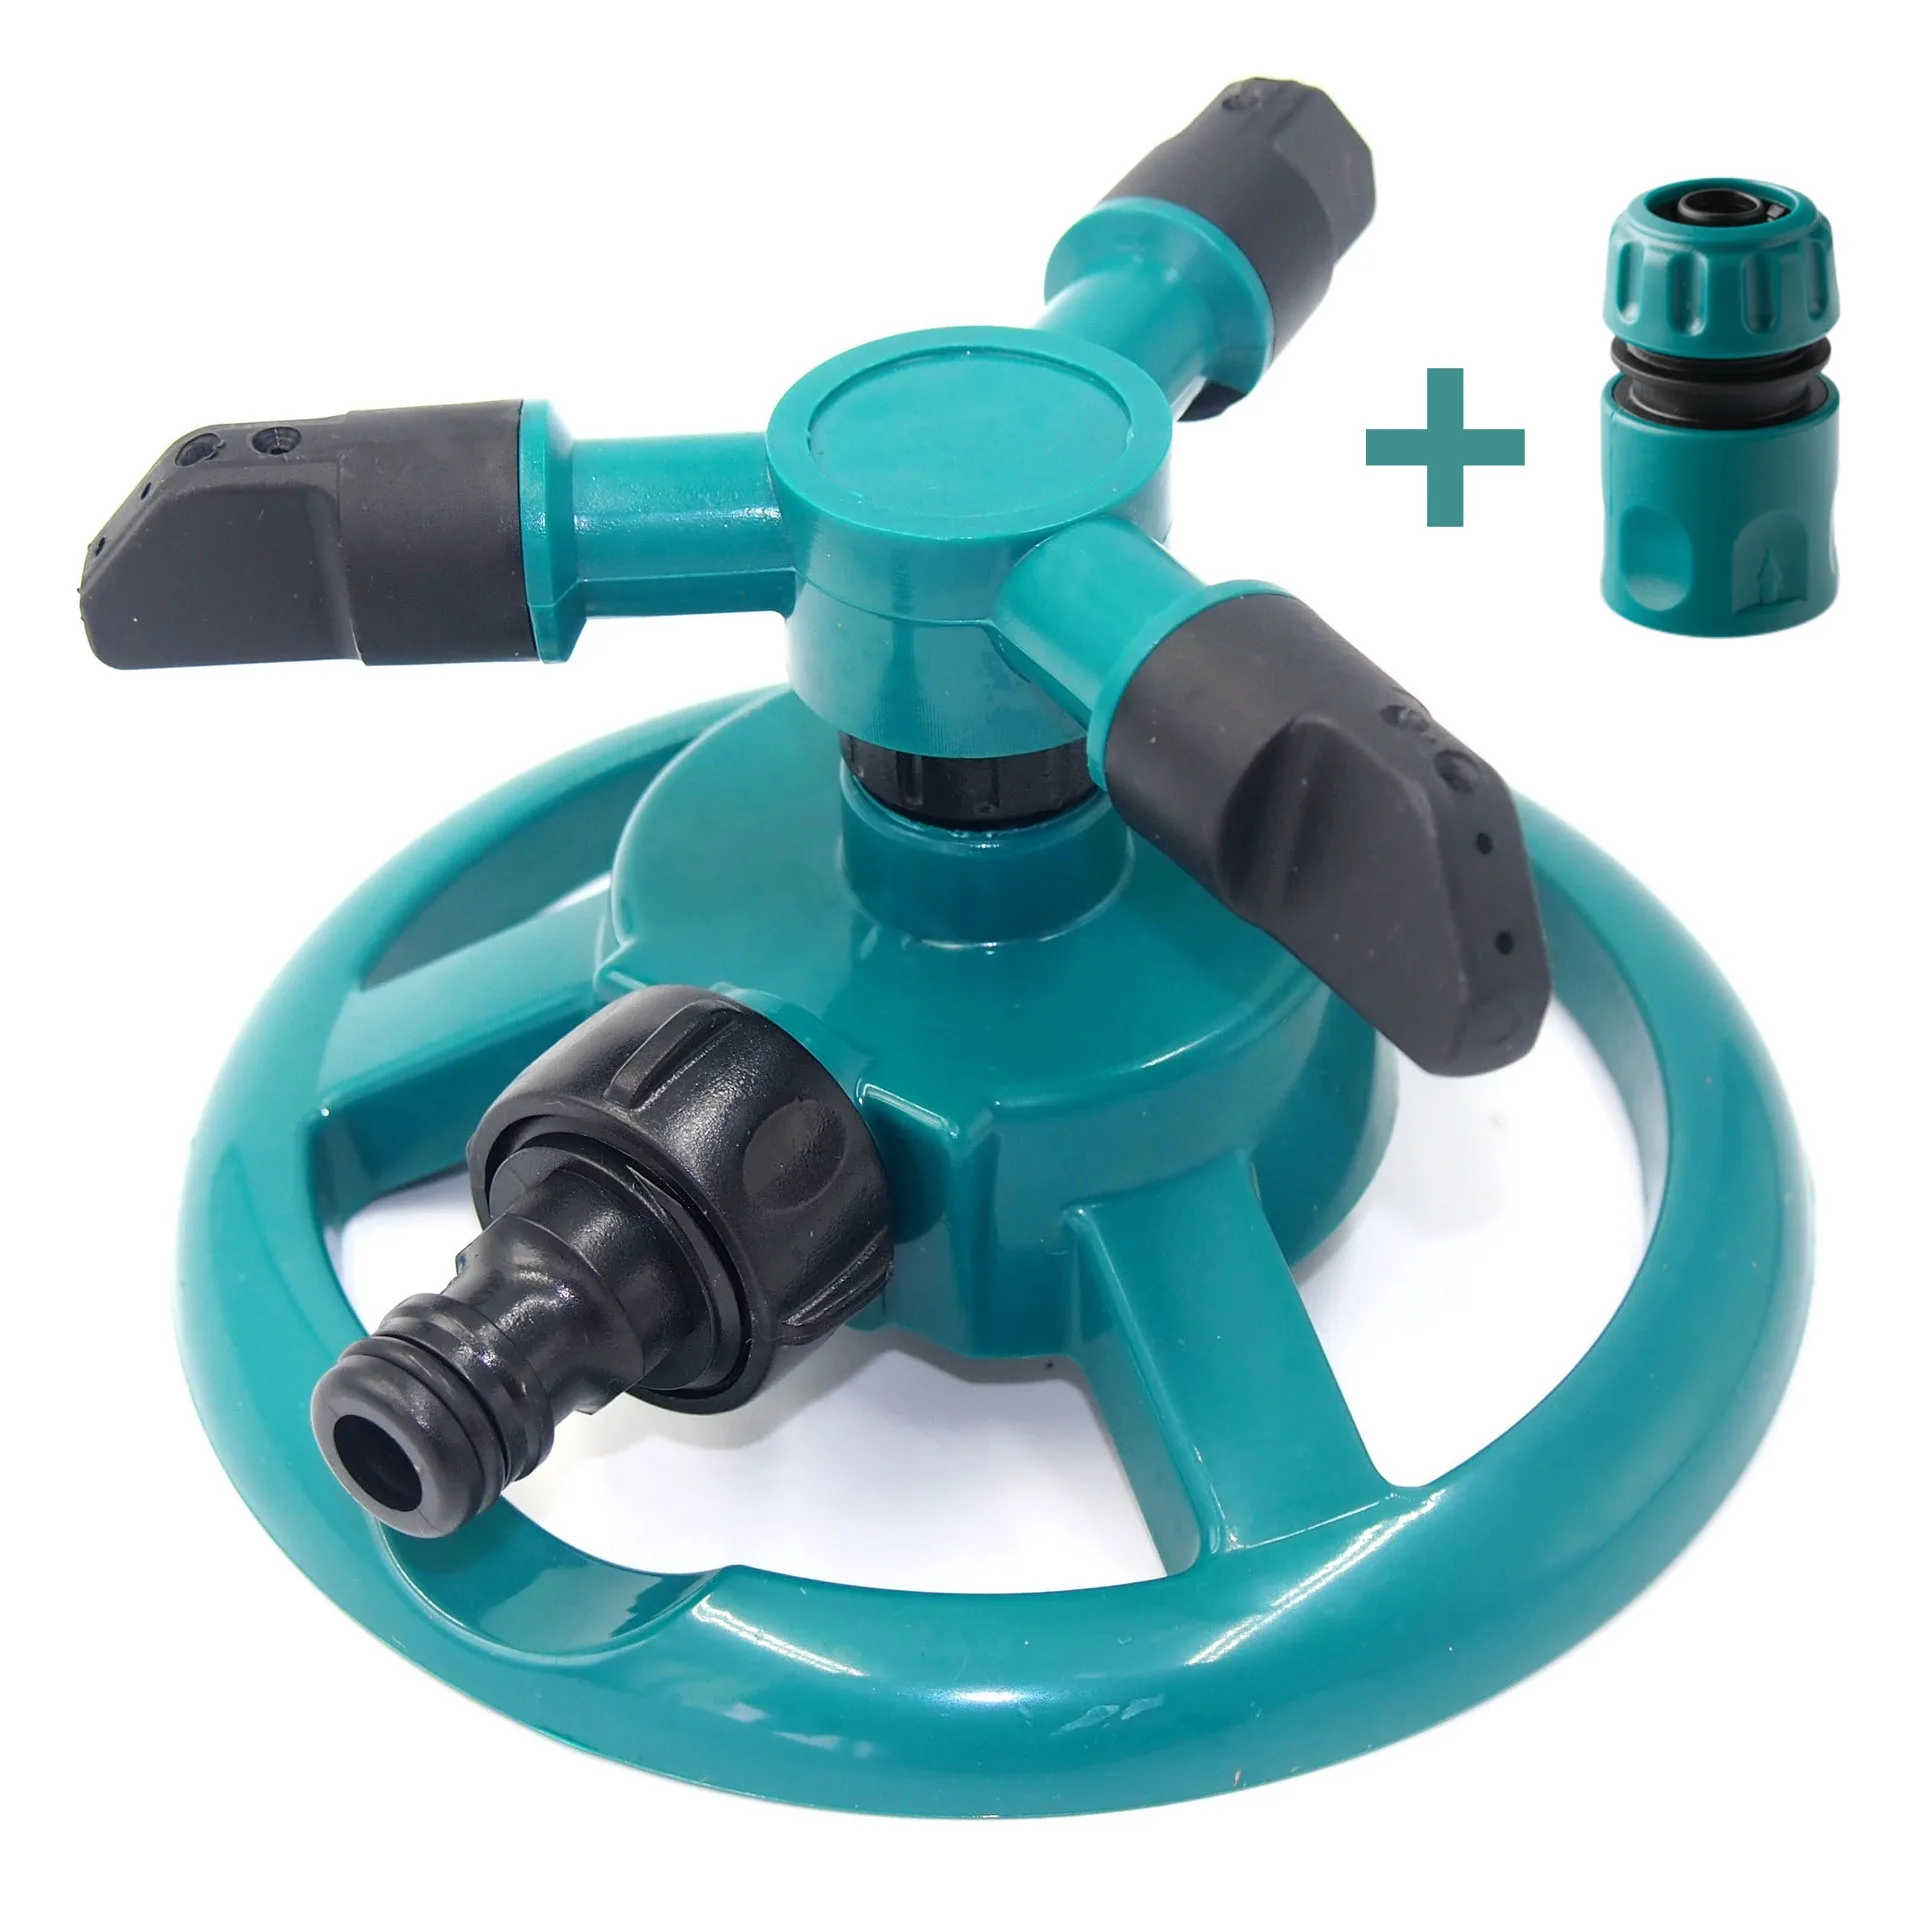 Garden Irrigation Sprinklers 360 Degree Rotating Water Sprayer 3 Arms Nozzles Garden Irrigation Tools Watering Grass Lawn